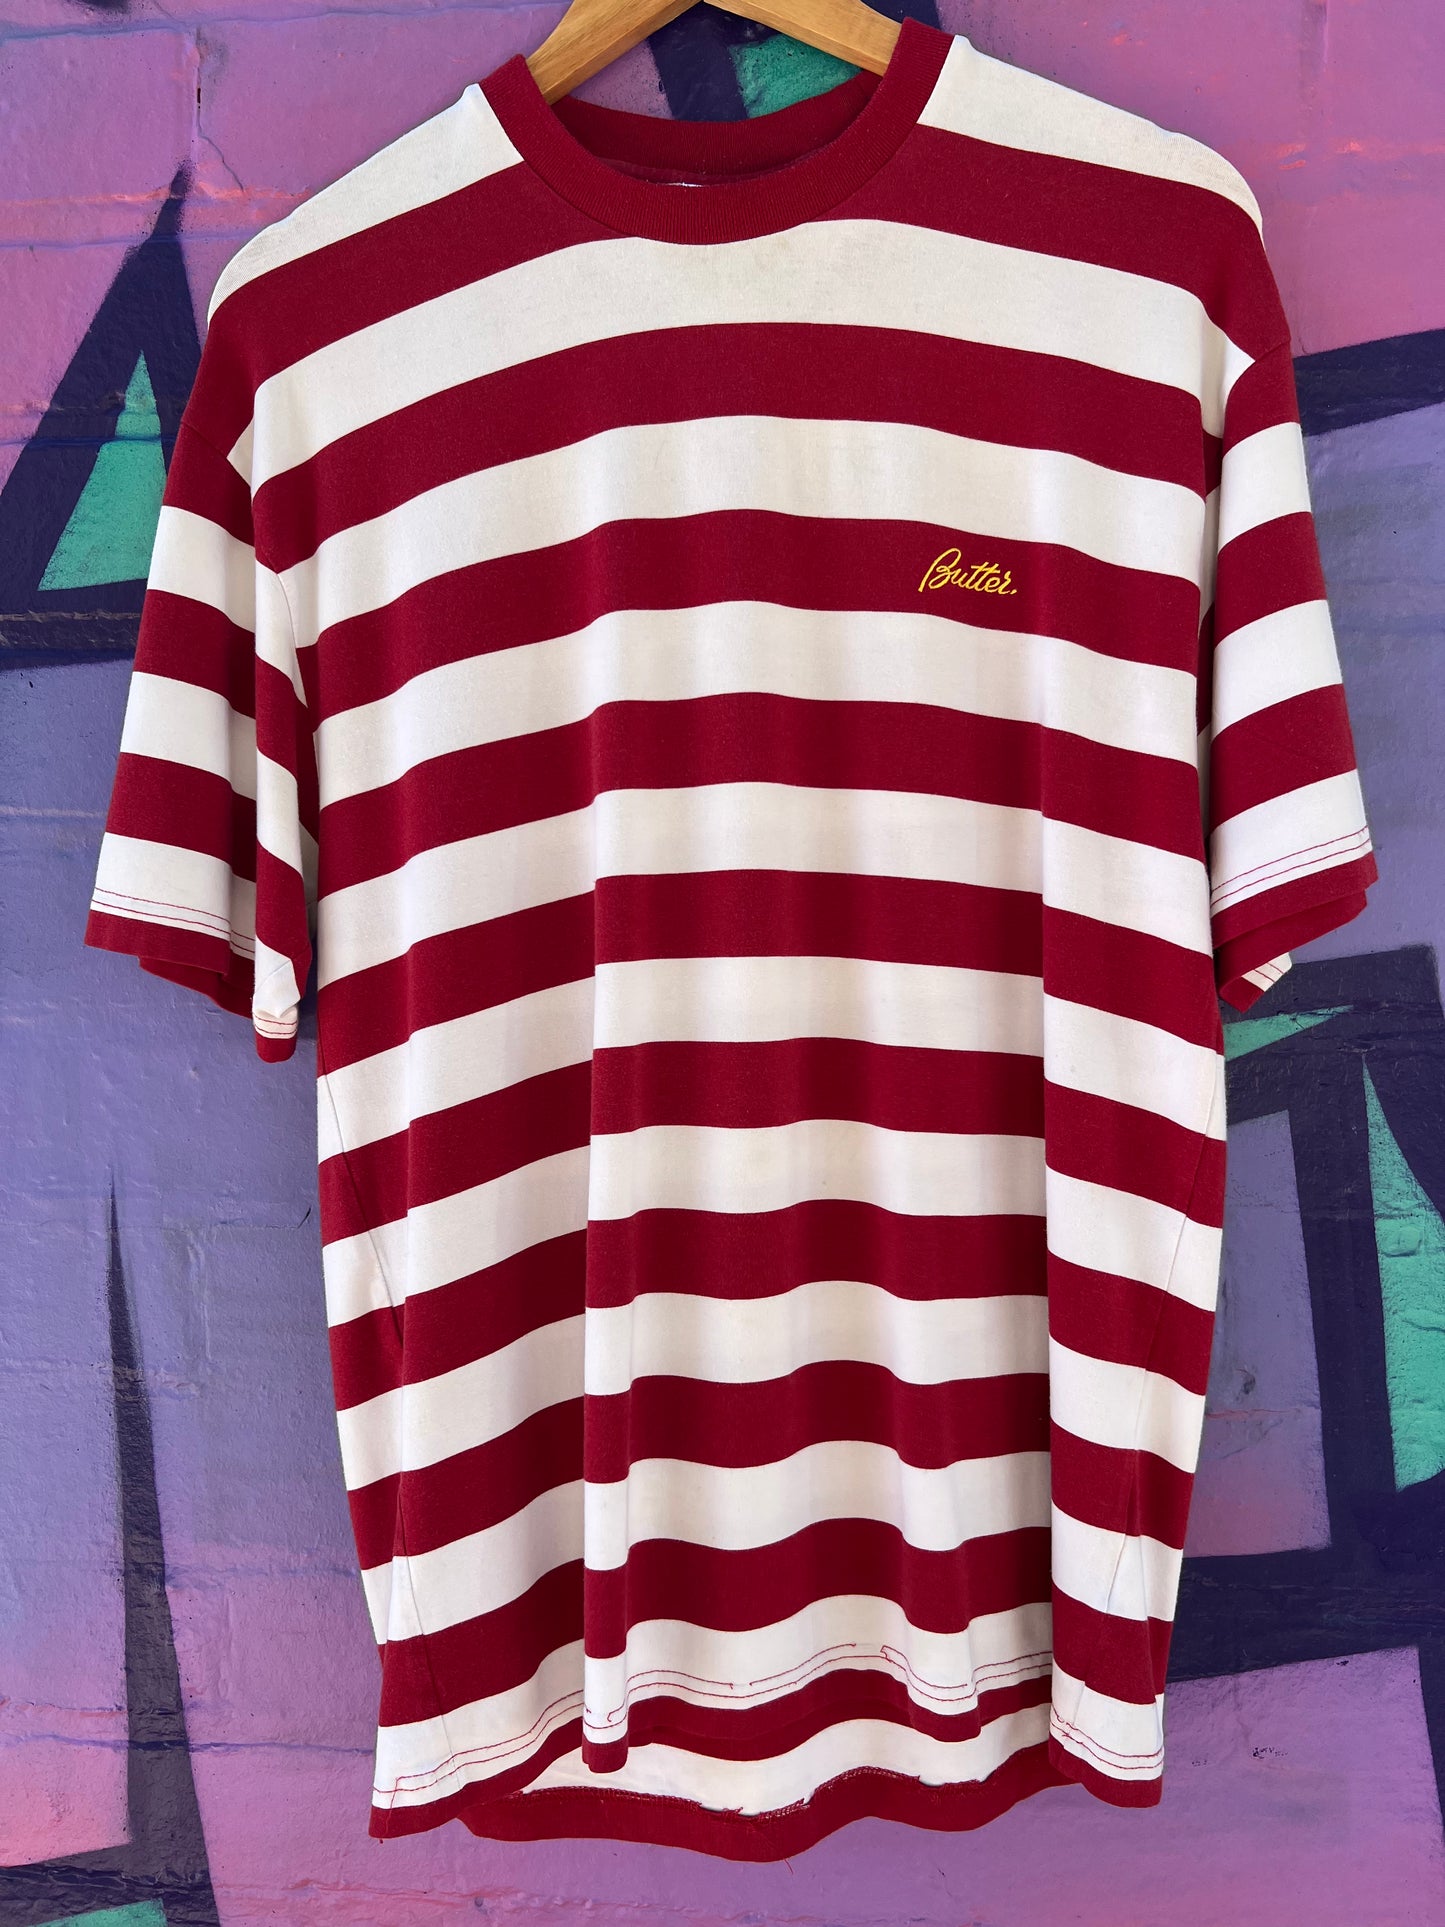 M - Butter White/Red Striped Tee